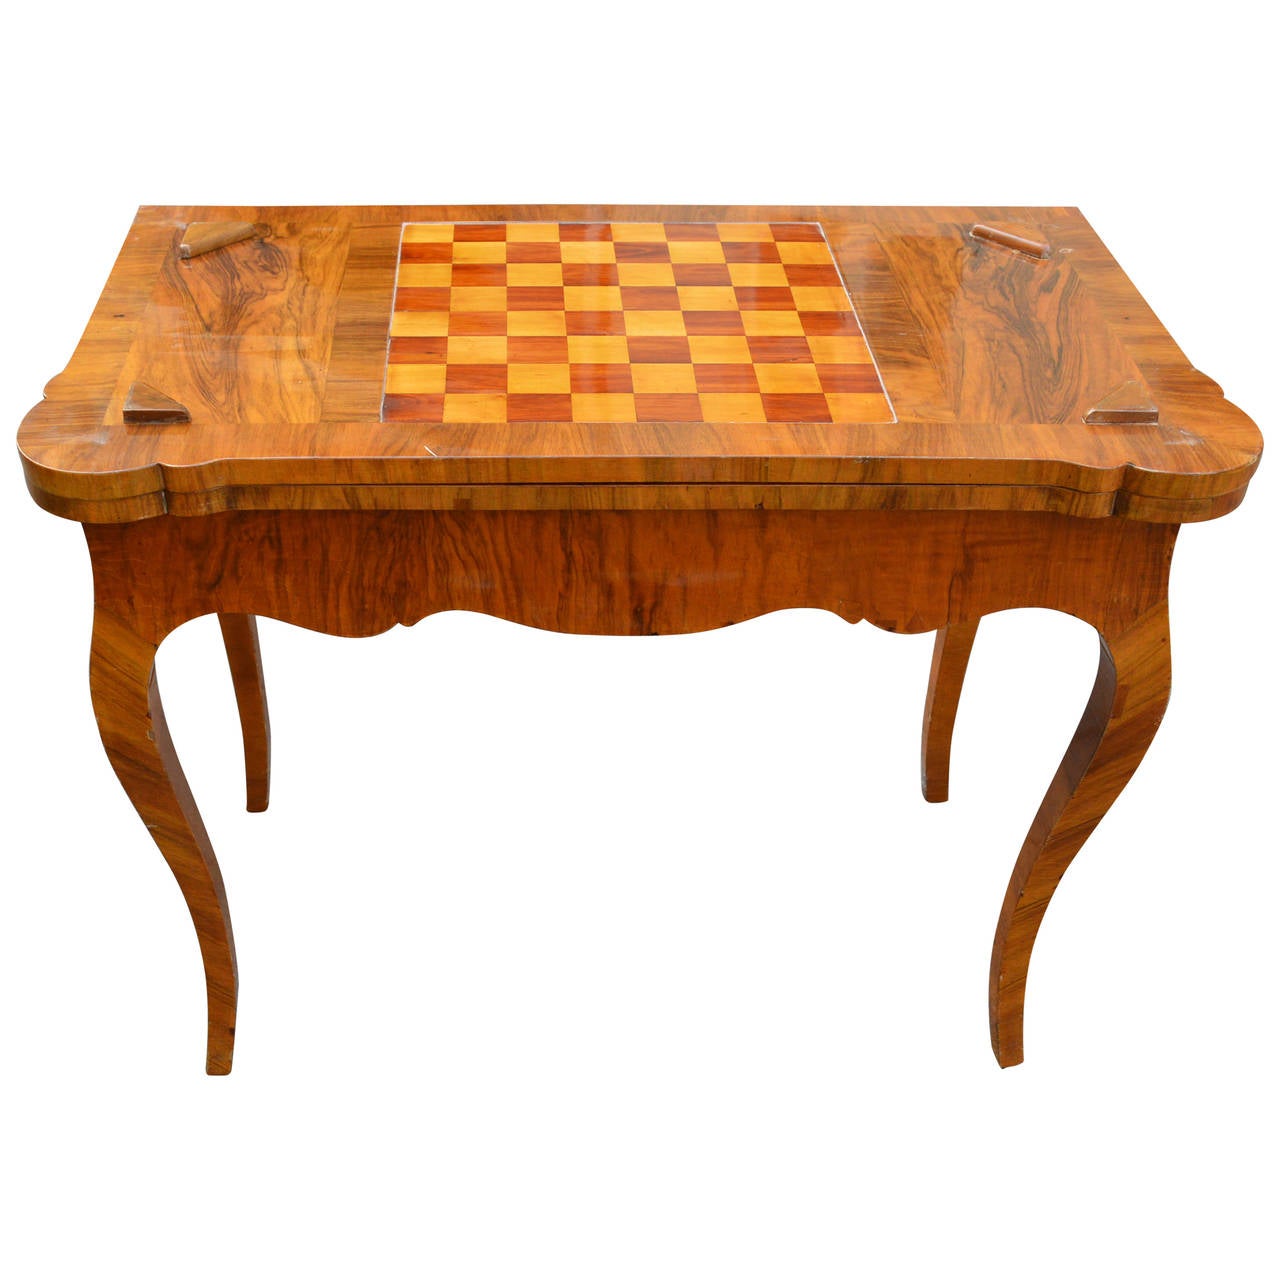 Late 18th century chess and backgammon game table, signature attributed to Stockholm work.